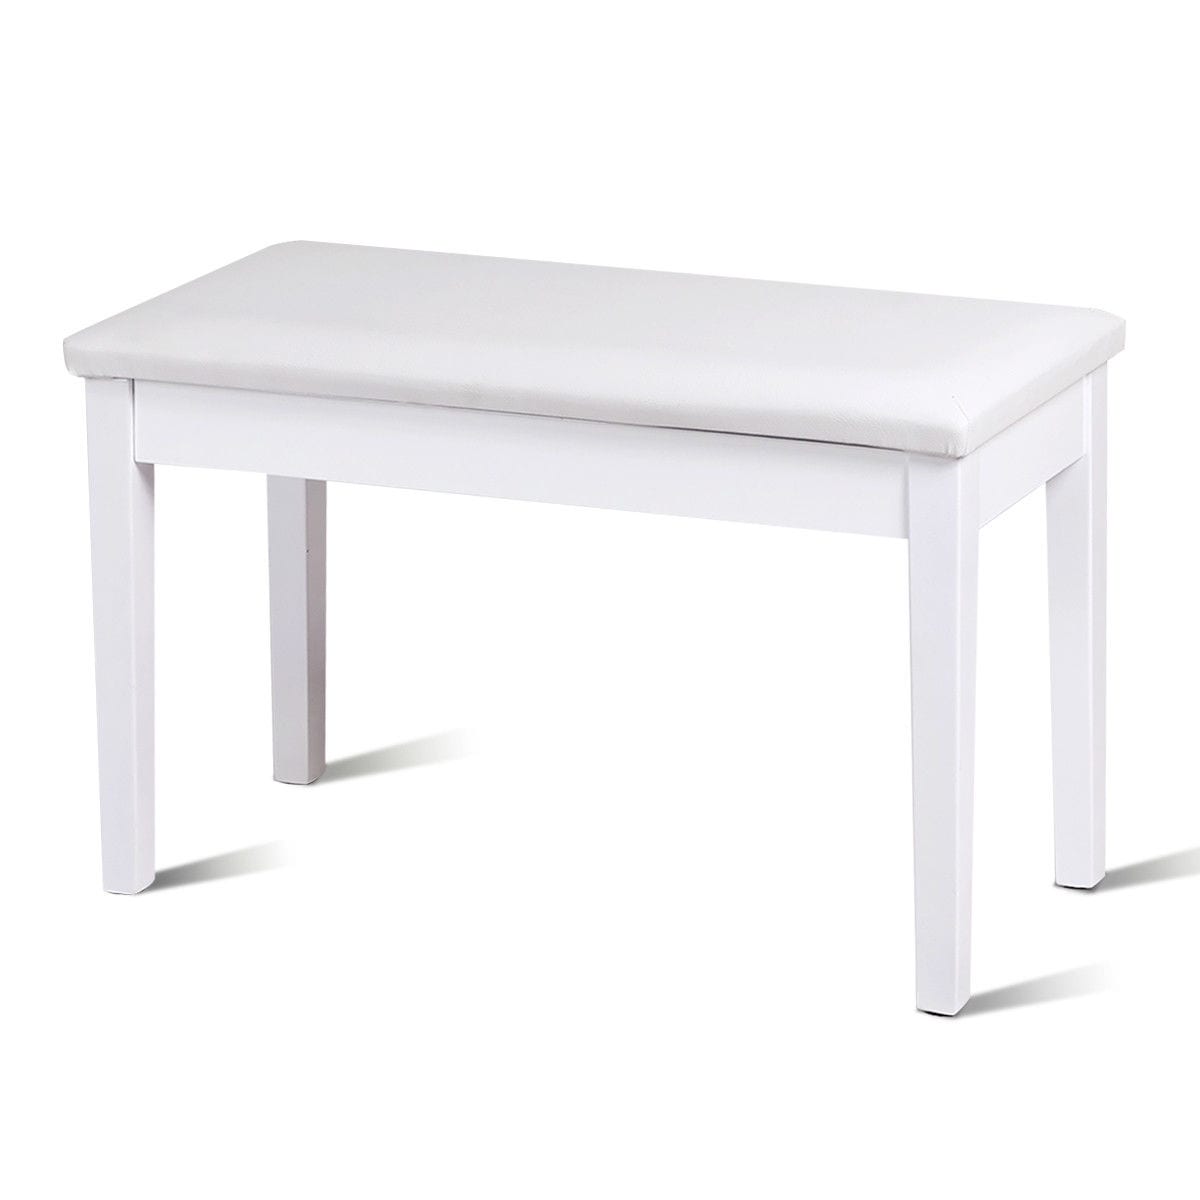 Augld Waterproof Piano Bench Stool Cover Faux Leather Rectangular Chair Cover White Double 